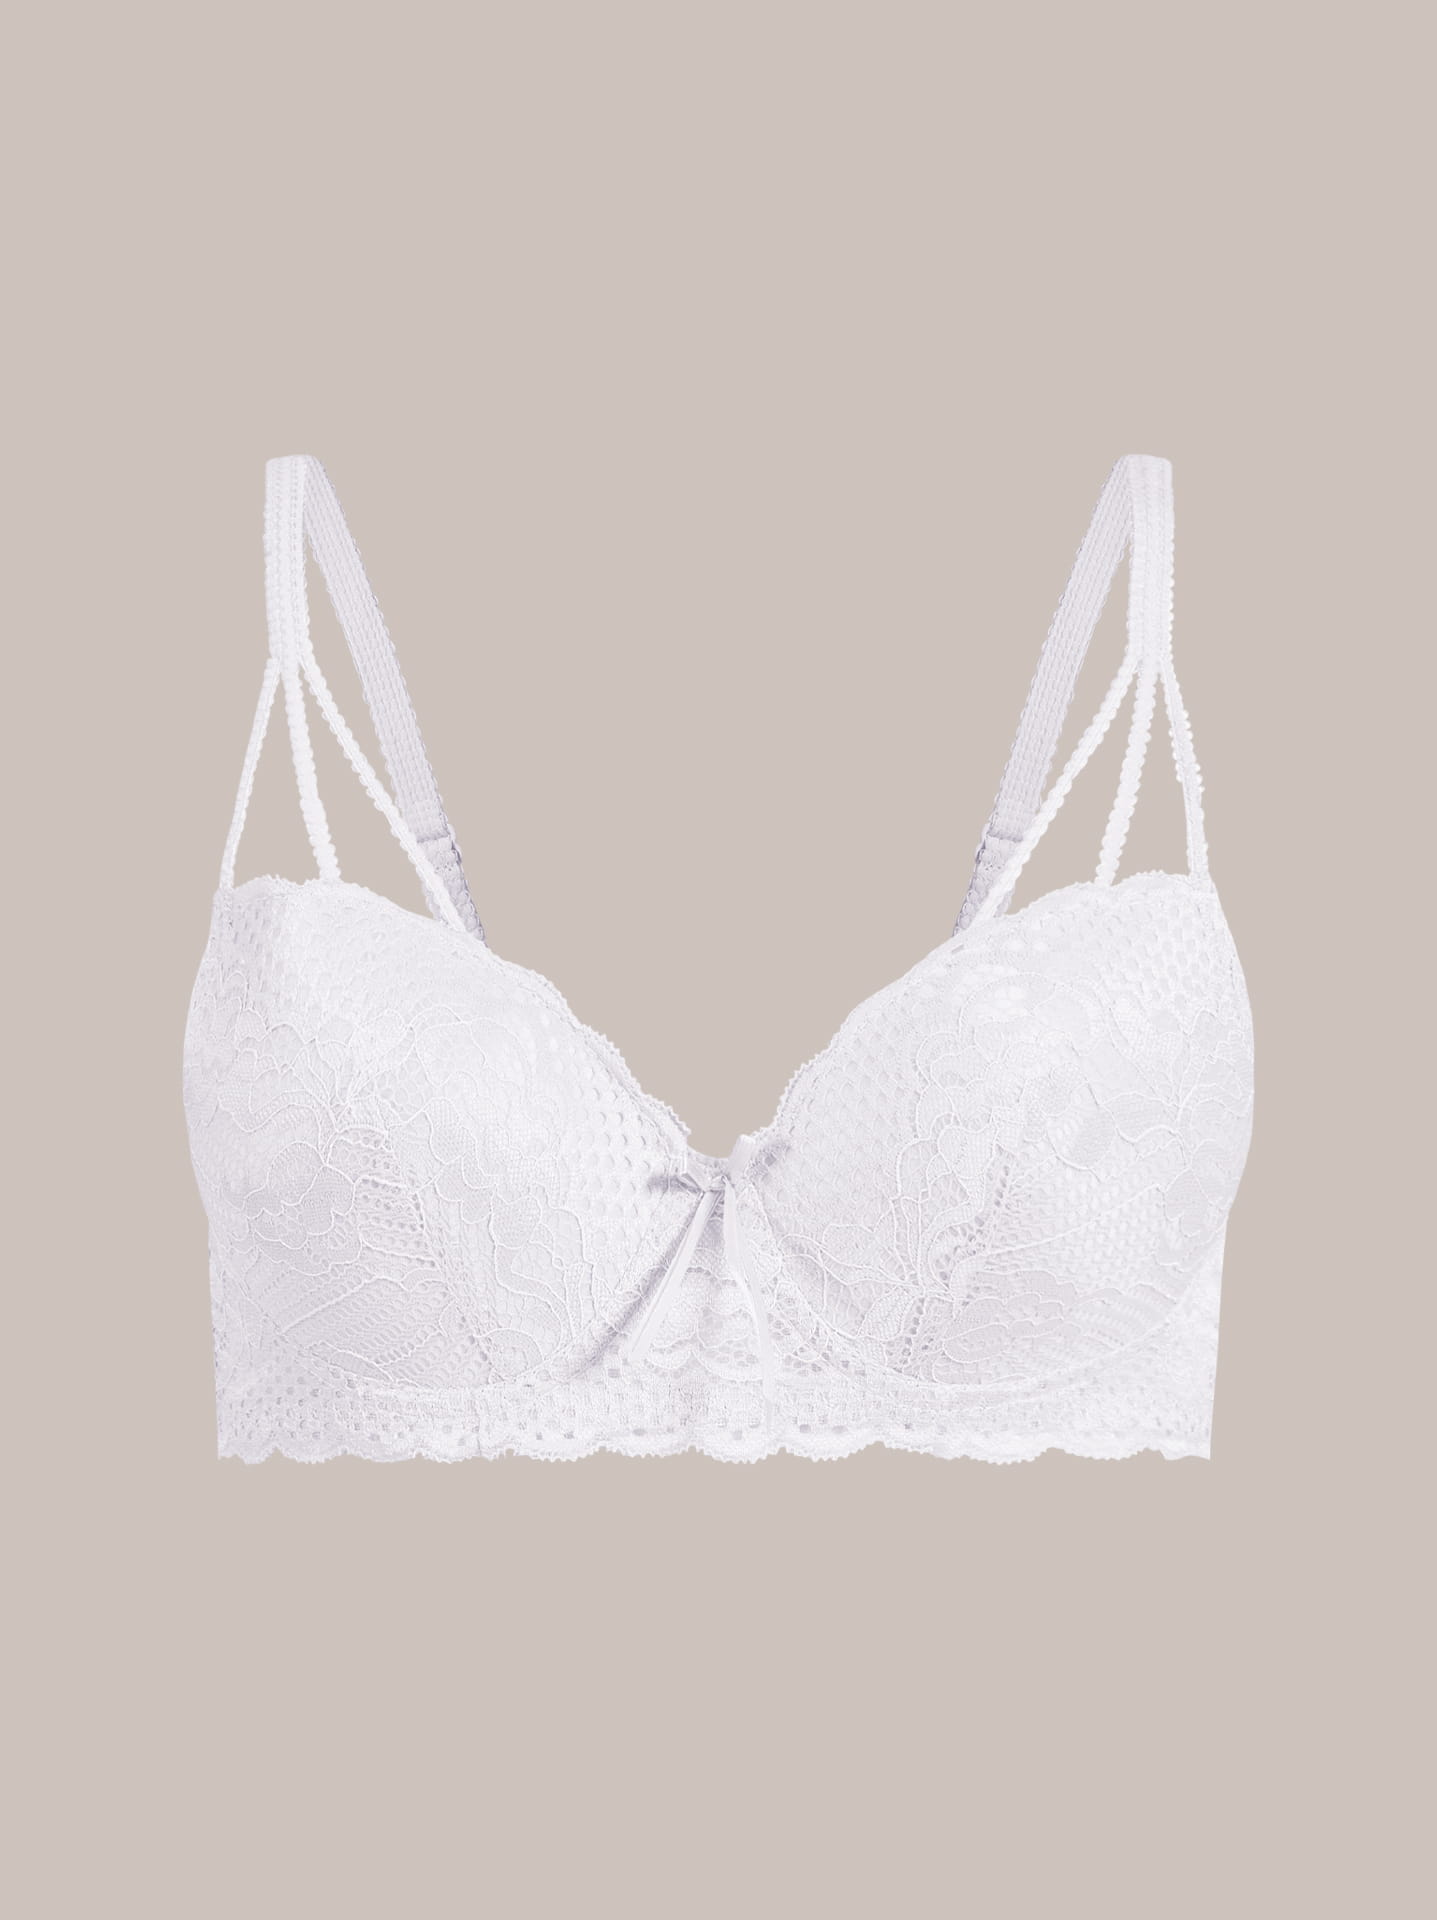 Bra with triple strap detail in white, 4.99€